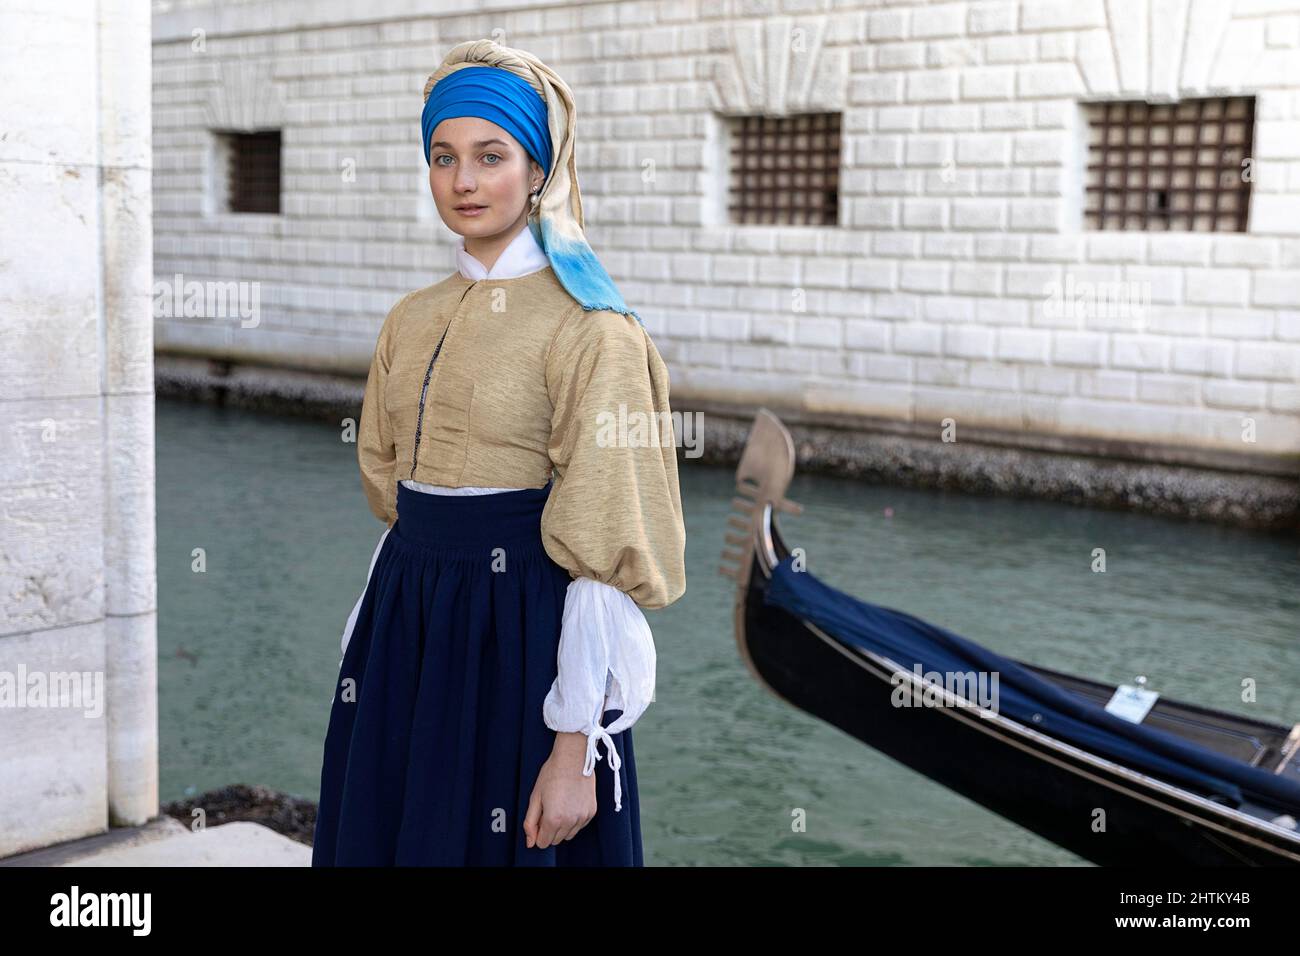 Woman in a beautiful traditional venetian costume and mask posing like Vermeer’s Girl With a Pearl Earring at the Venice carneval, venice, Italy Stock Photo